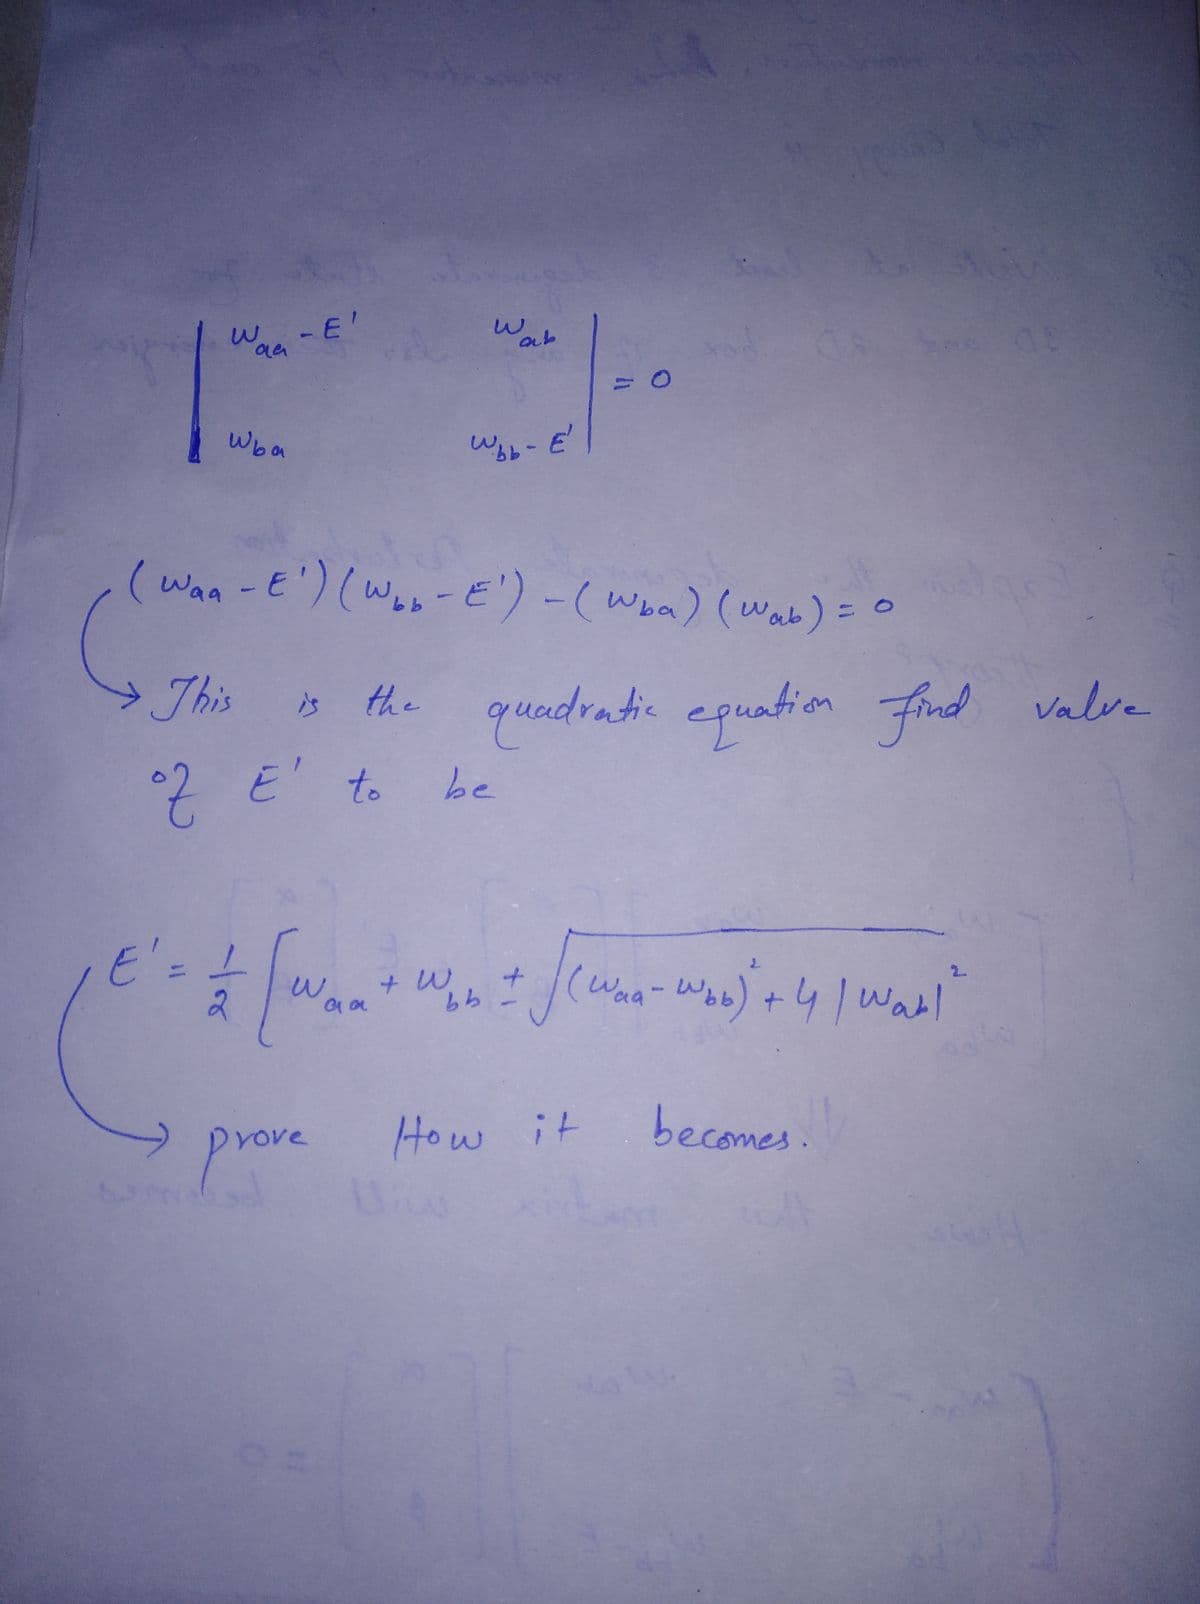 (Waa-Wob) +L
War
W-E'
Wae
Wba
ヨ-19m
(Wan -E') (W-E')-(woa) (Wab) = 0
This
quadratic equation find valve
is
2.
2 E' to
be
E'=
2.
Waa-w
Wabl
らら
How it
becomes.
yove
